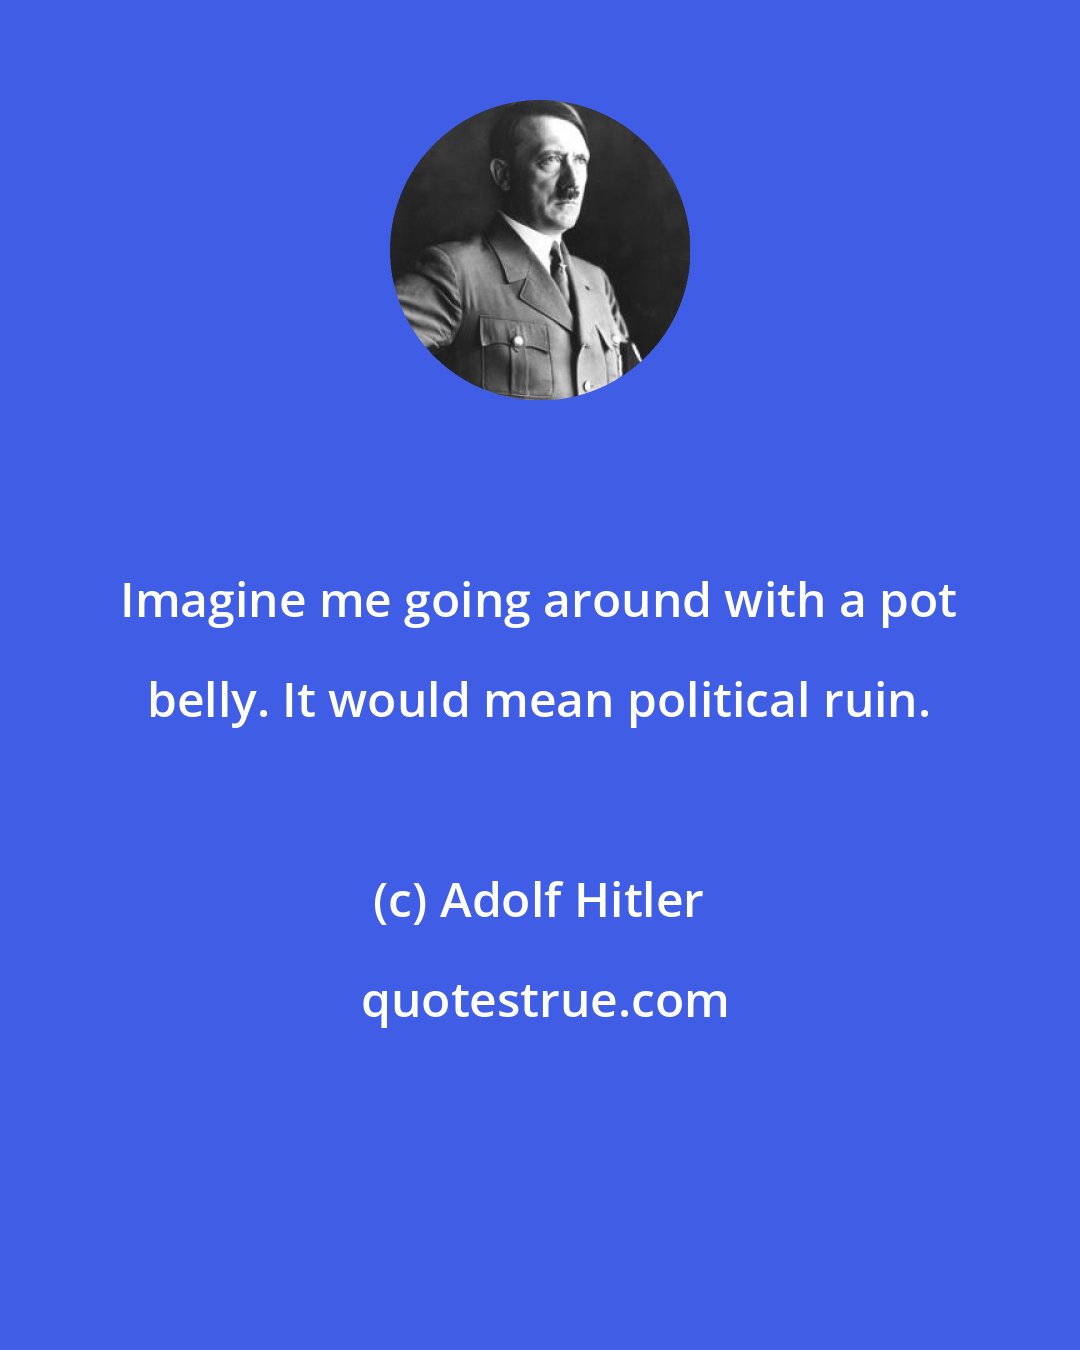 Adolf Hitler: Imagine me going around with a pot belly. It would mean political ruin.